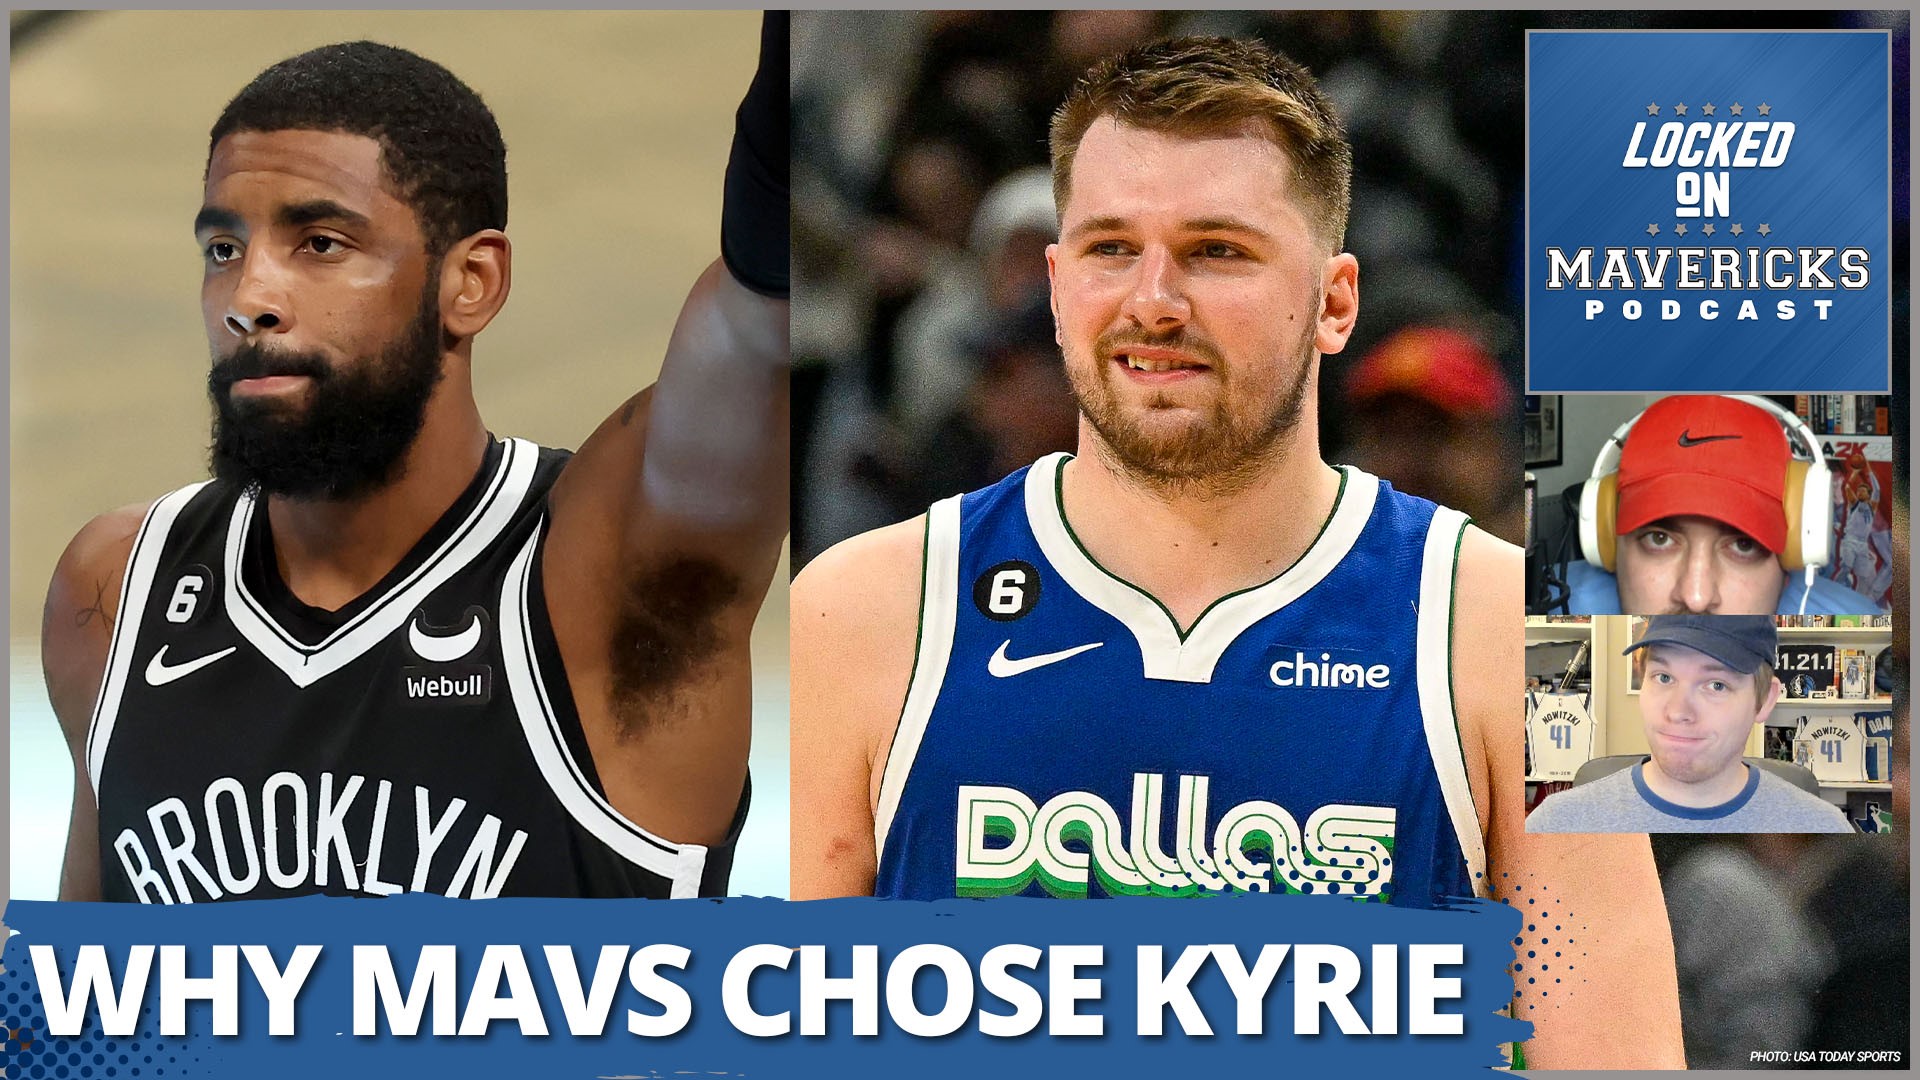 Nick Angstadt & Isaac Harris discuss the Kyrie Irving Trade and how the Mavs pulled it off. What happens now with the Mavs and Kyrie?